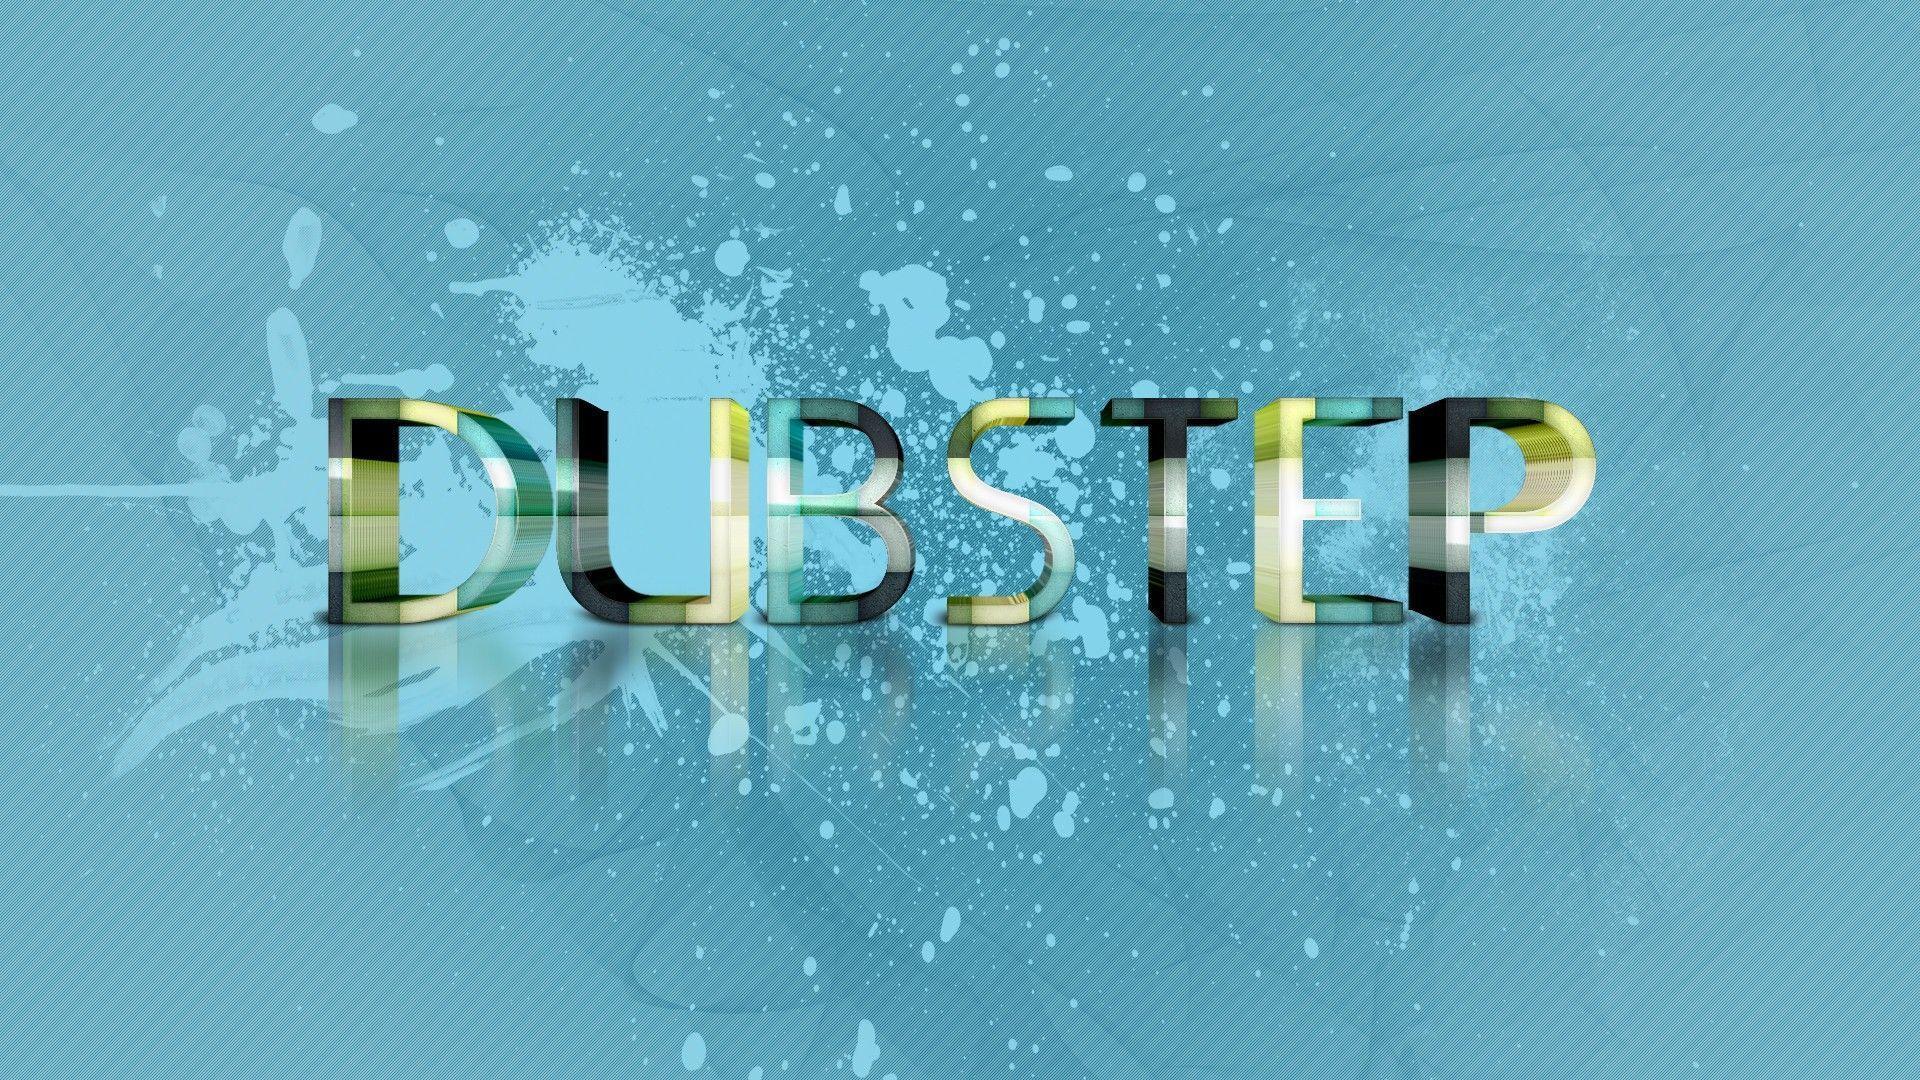 Wallpaper For > Awesome Dubstep Background HD